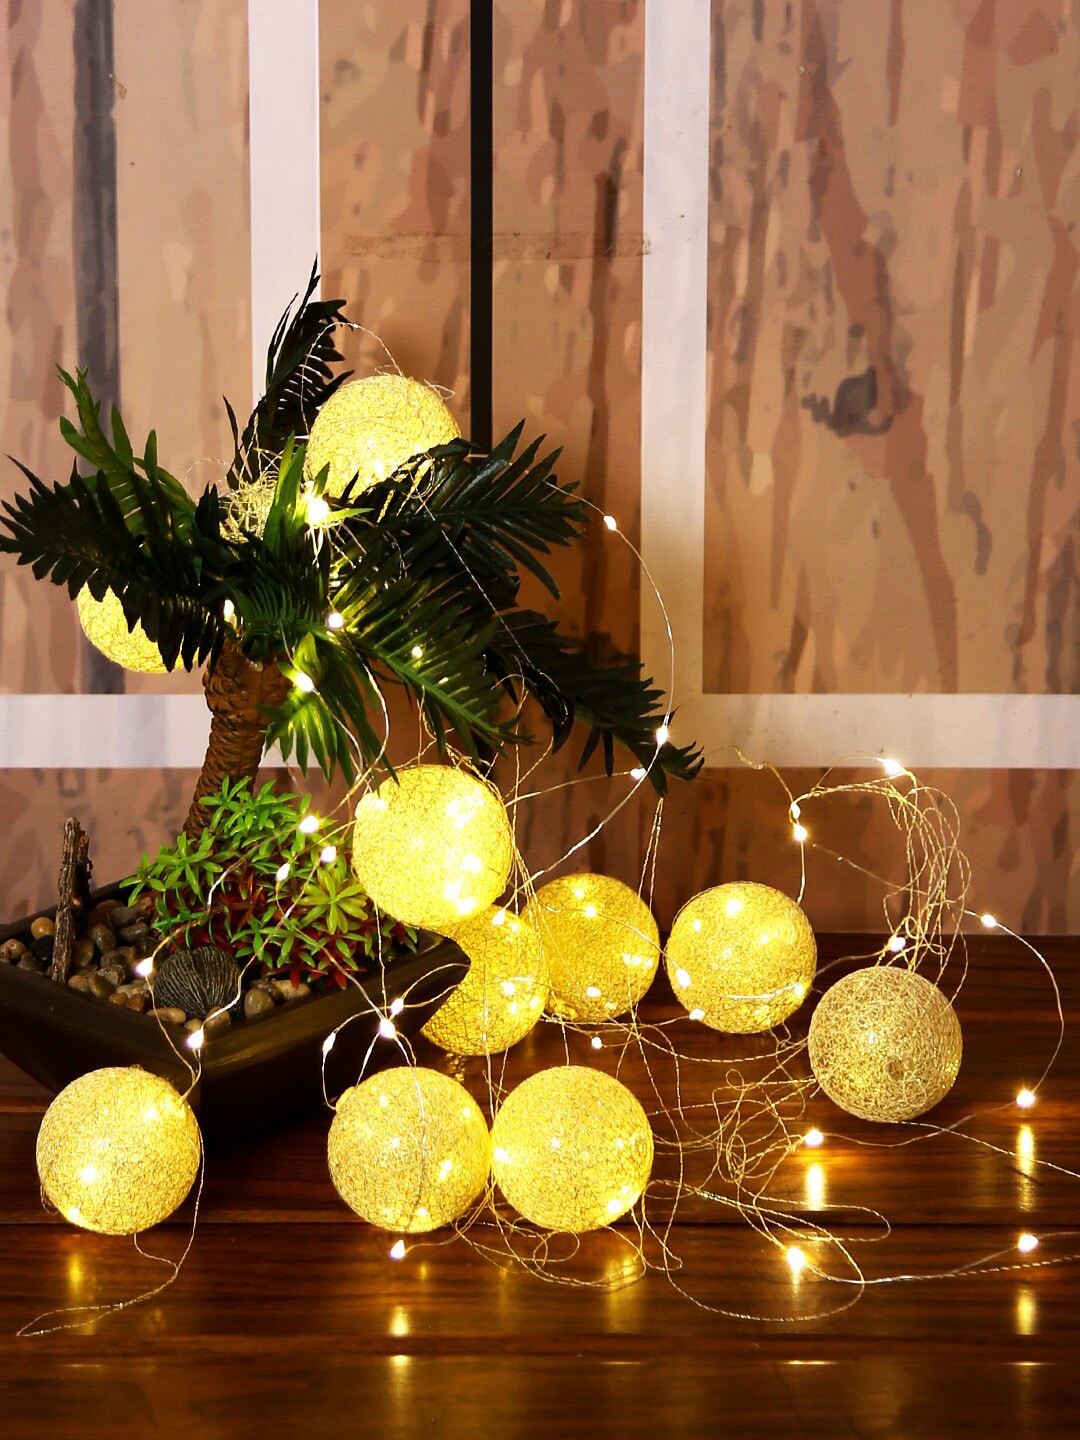 Aapno Rajasthan Round Shape Golden String Lights Price in India